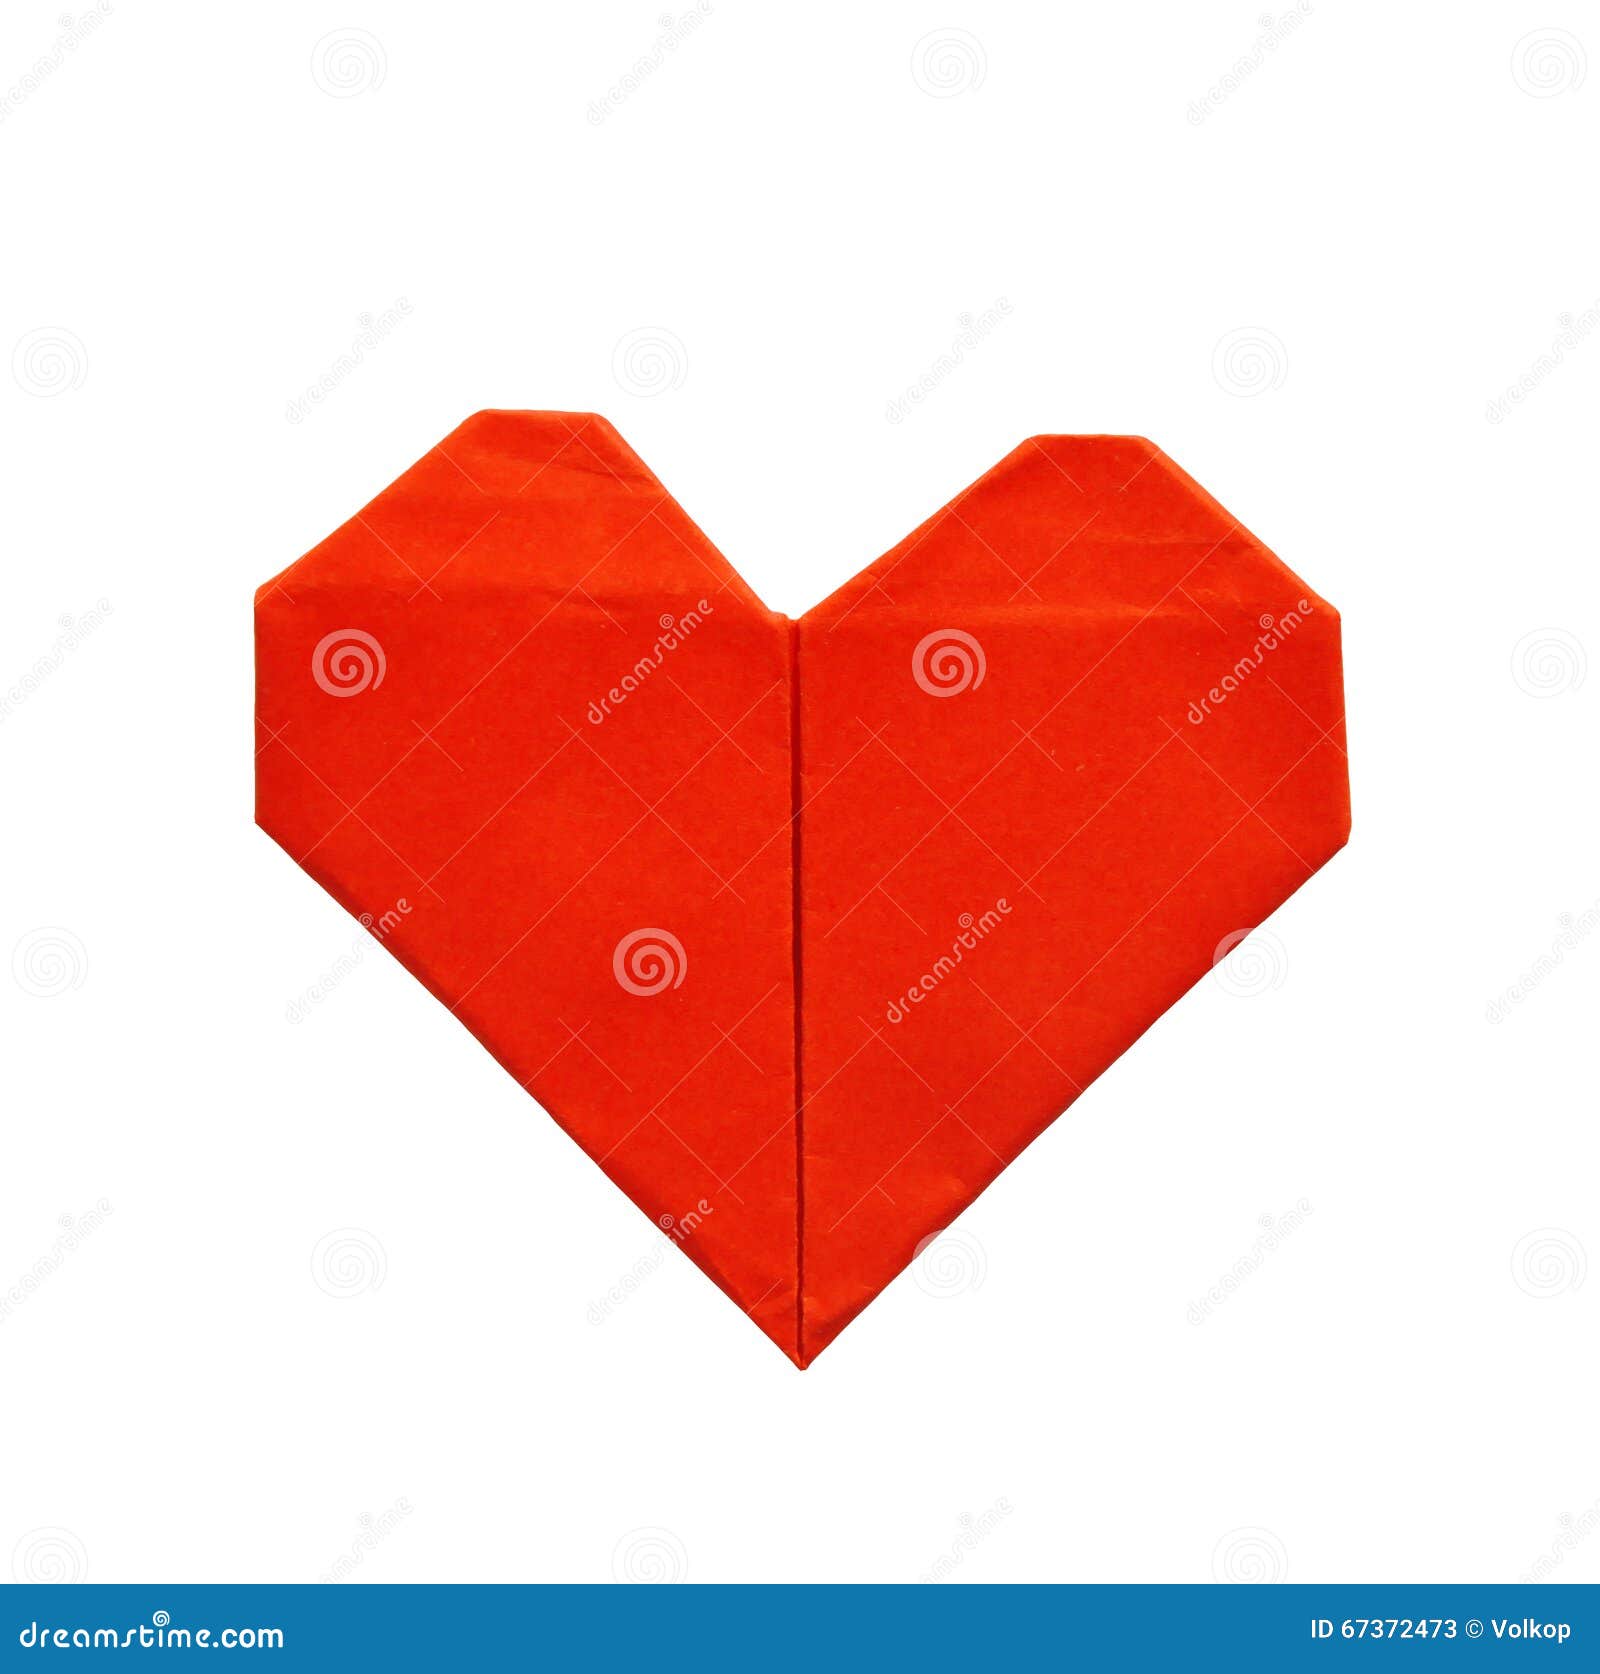 Red Paper Hearts Isolated On White Background Stock Photo, Picture